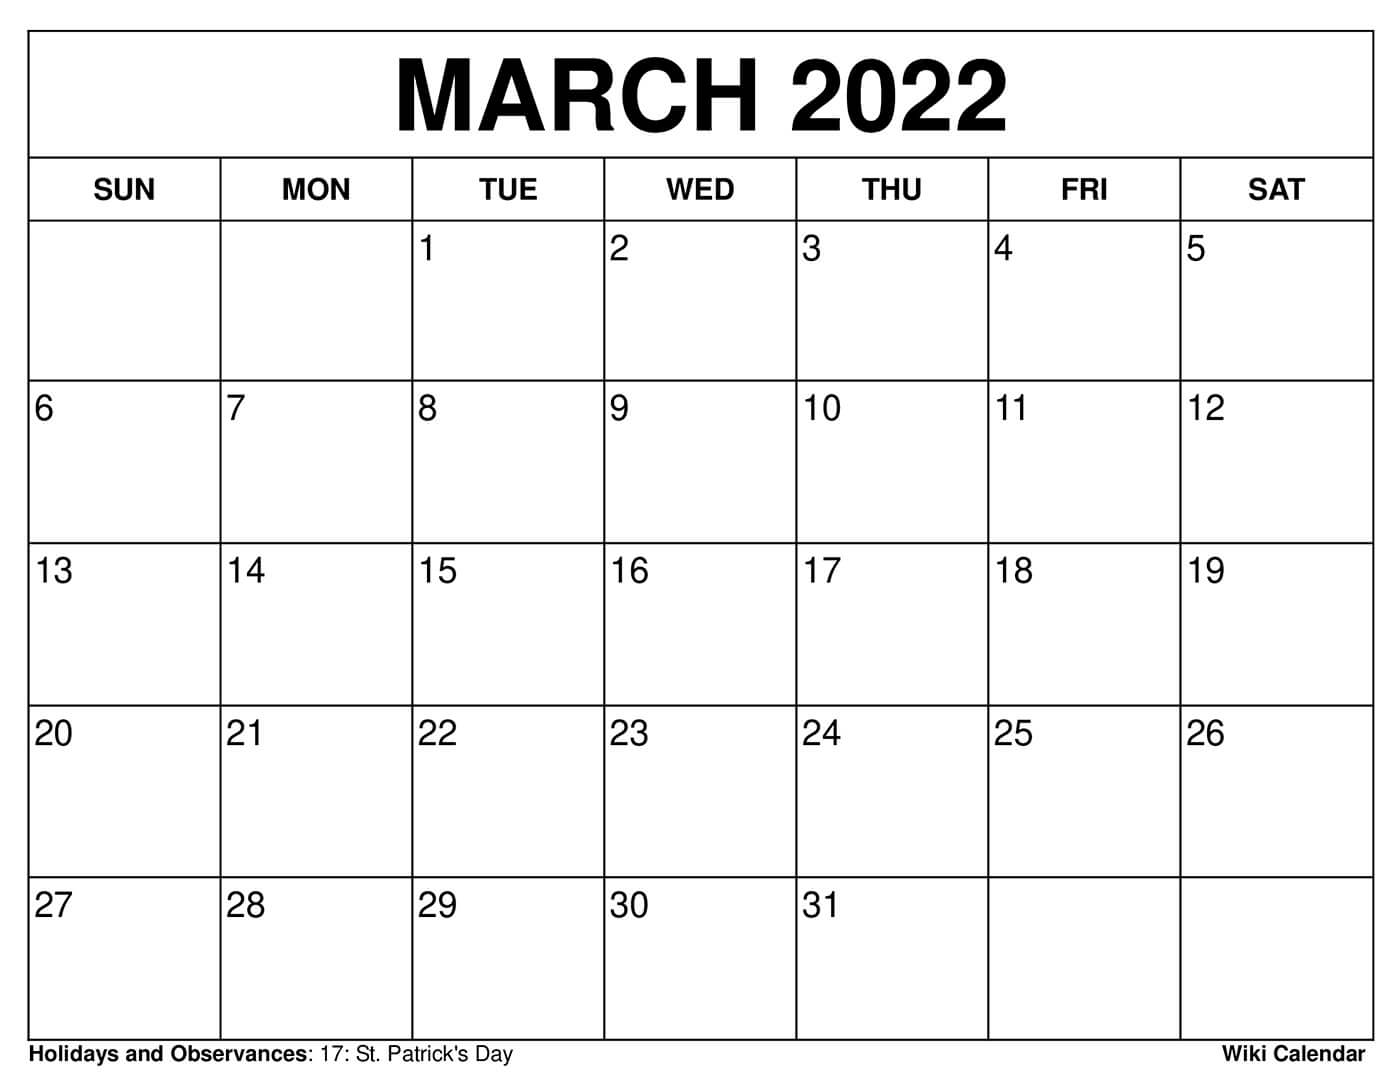 March 2022 Calendar With Holidays.Free Printable March 2022 Calendars Wiki Calendar